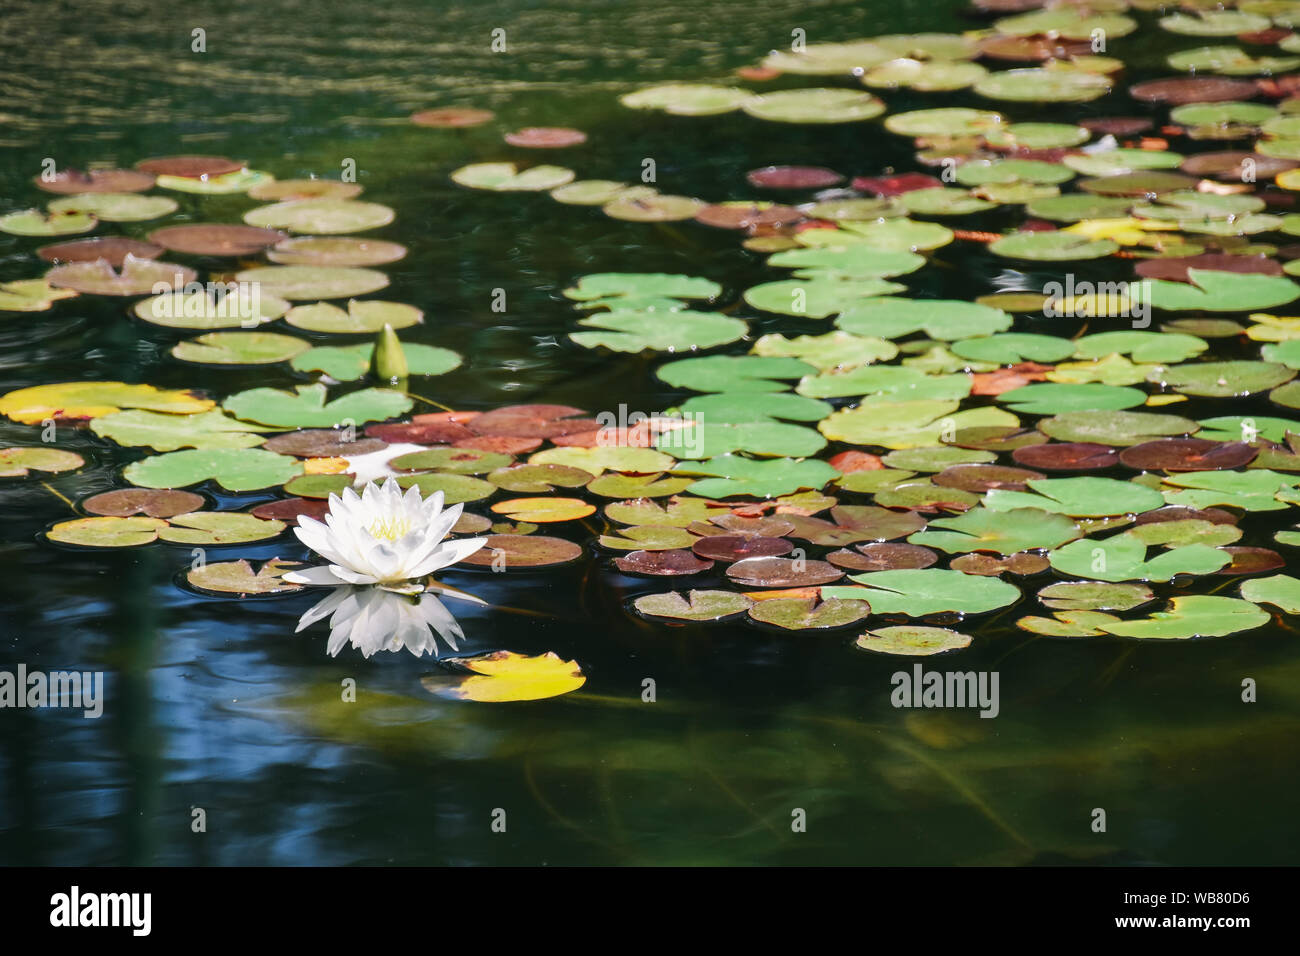 water lily petal with reflection on pond or lake Stock Photo